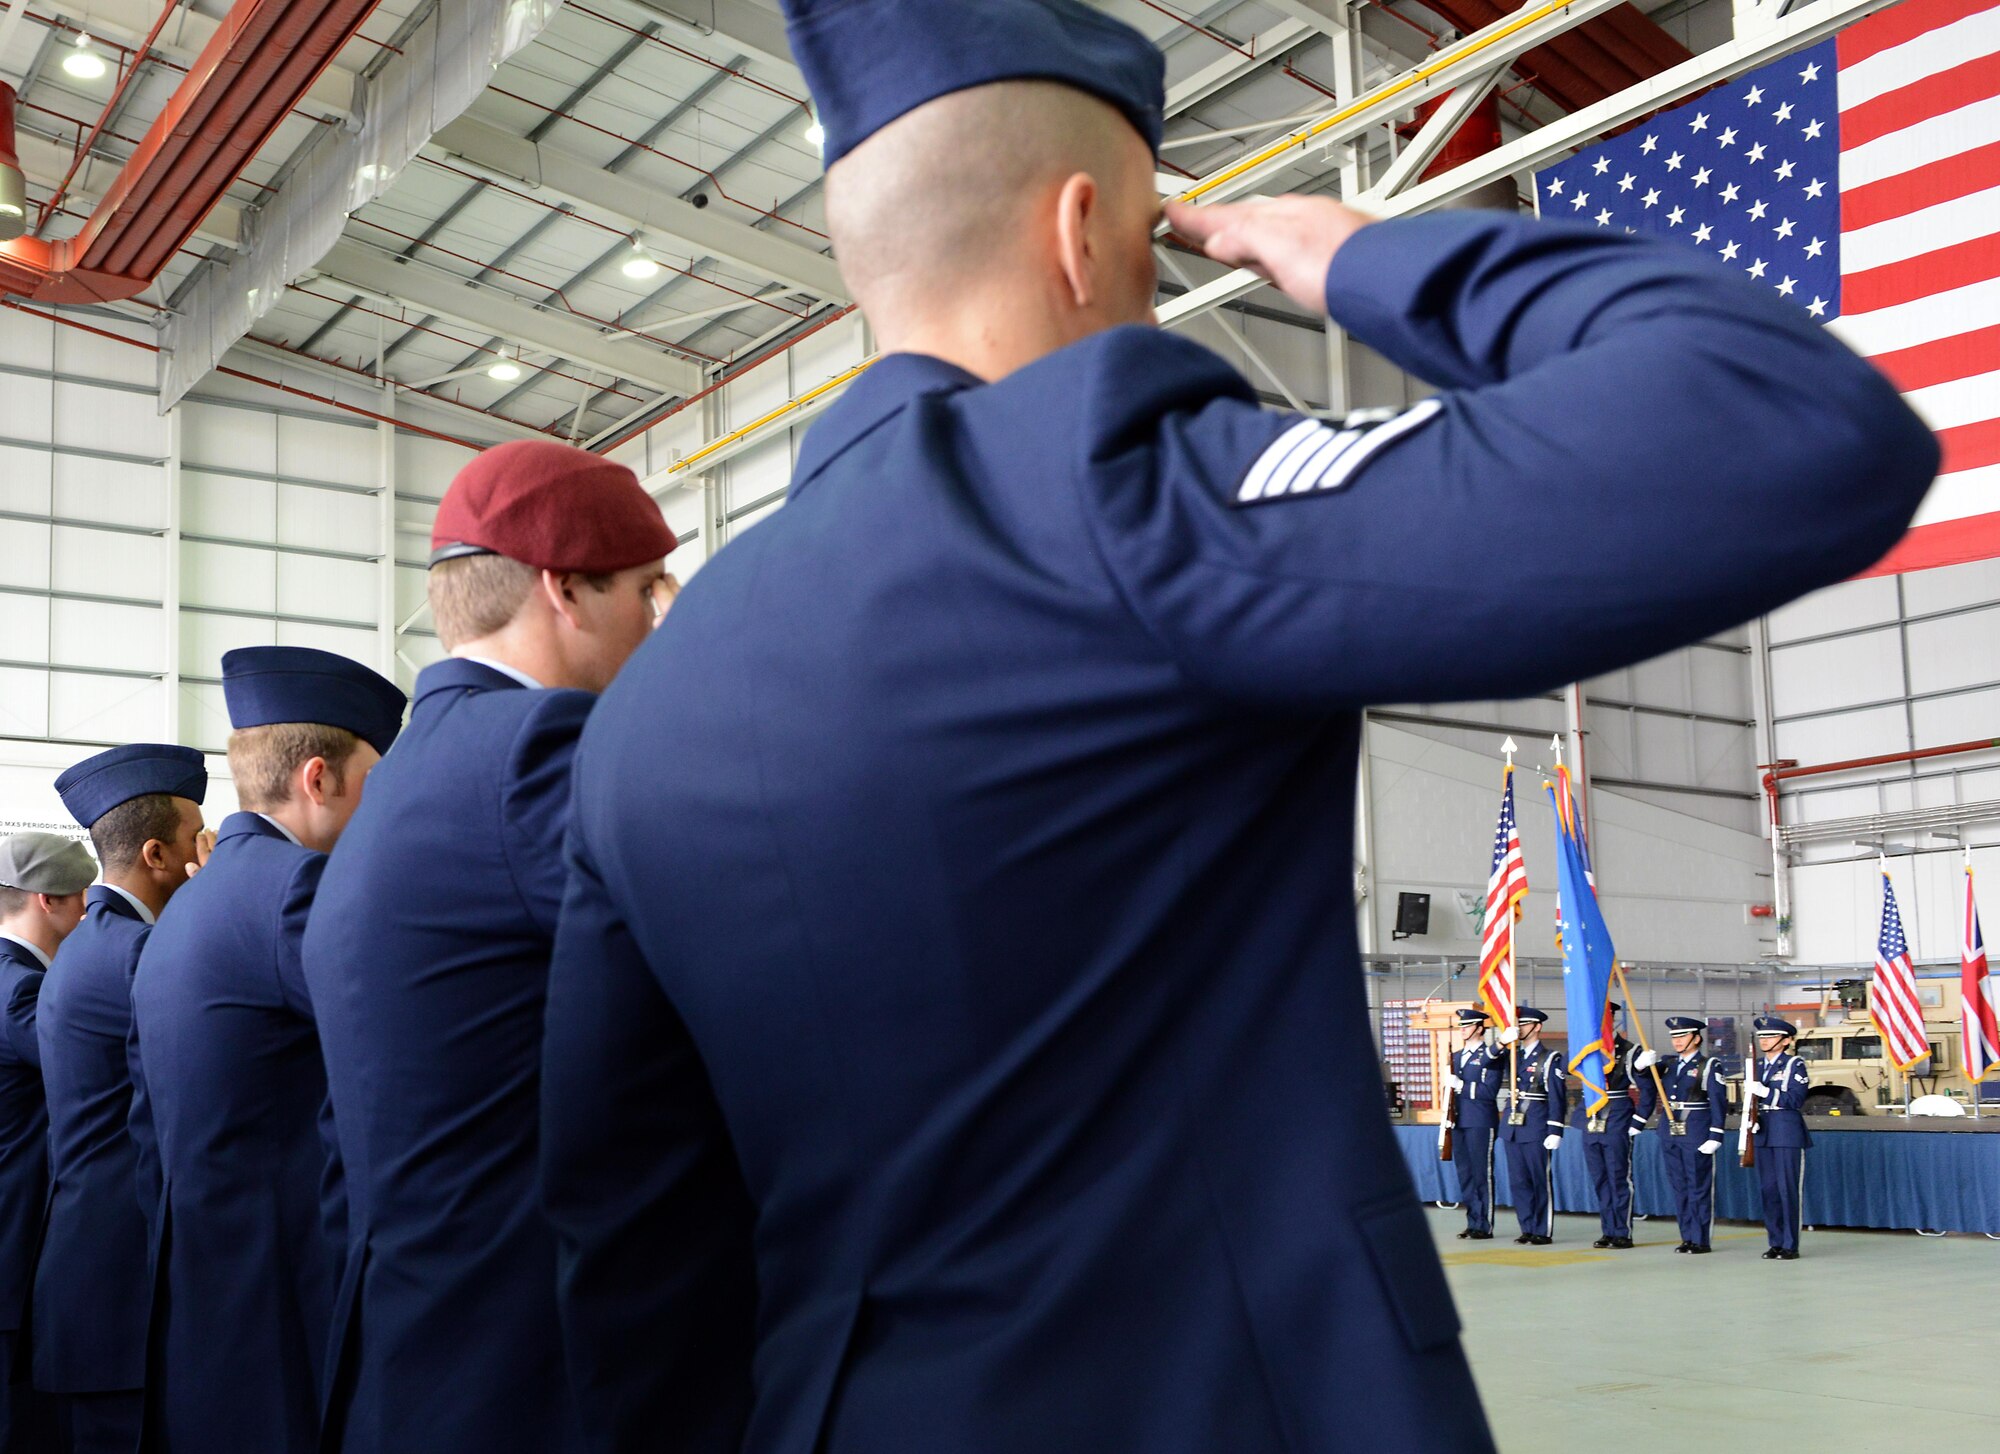 Air Commandos from the 752nd Special Operations Group render a salute as the U.S. and British national anthems are played just prior to the offical redesignation of the 352nd Special Operations Group to the 352nd Special Operations Wing March 23, 2015, in Hangar 814 on RAF Mildenhall, England. Immediately following the anthems, the 352nd Special Operations Group was redesignated as the 352nd Special Operations Wing. The 752nd Special Operations Group and the 352nd Special Operations Maintenance Group were activated. (U.S Air Force photo by Tech. Sgt. Stacia Zachary/Released)